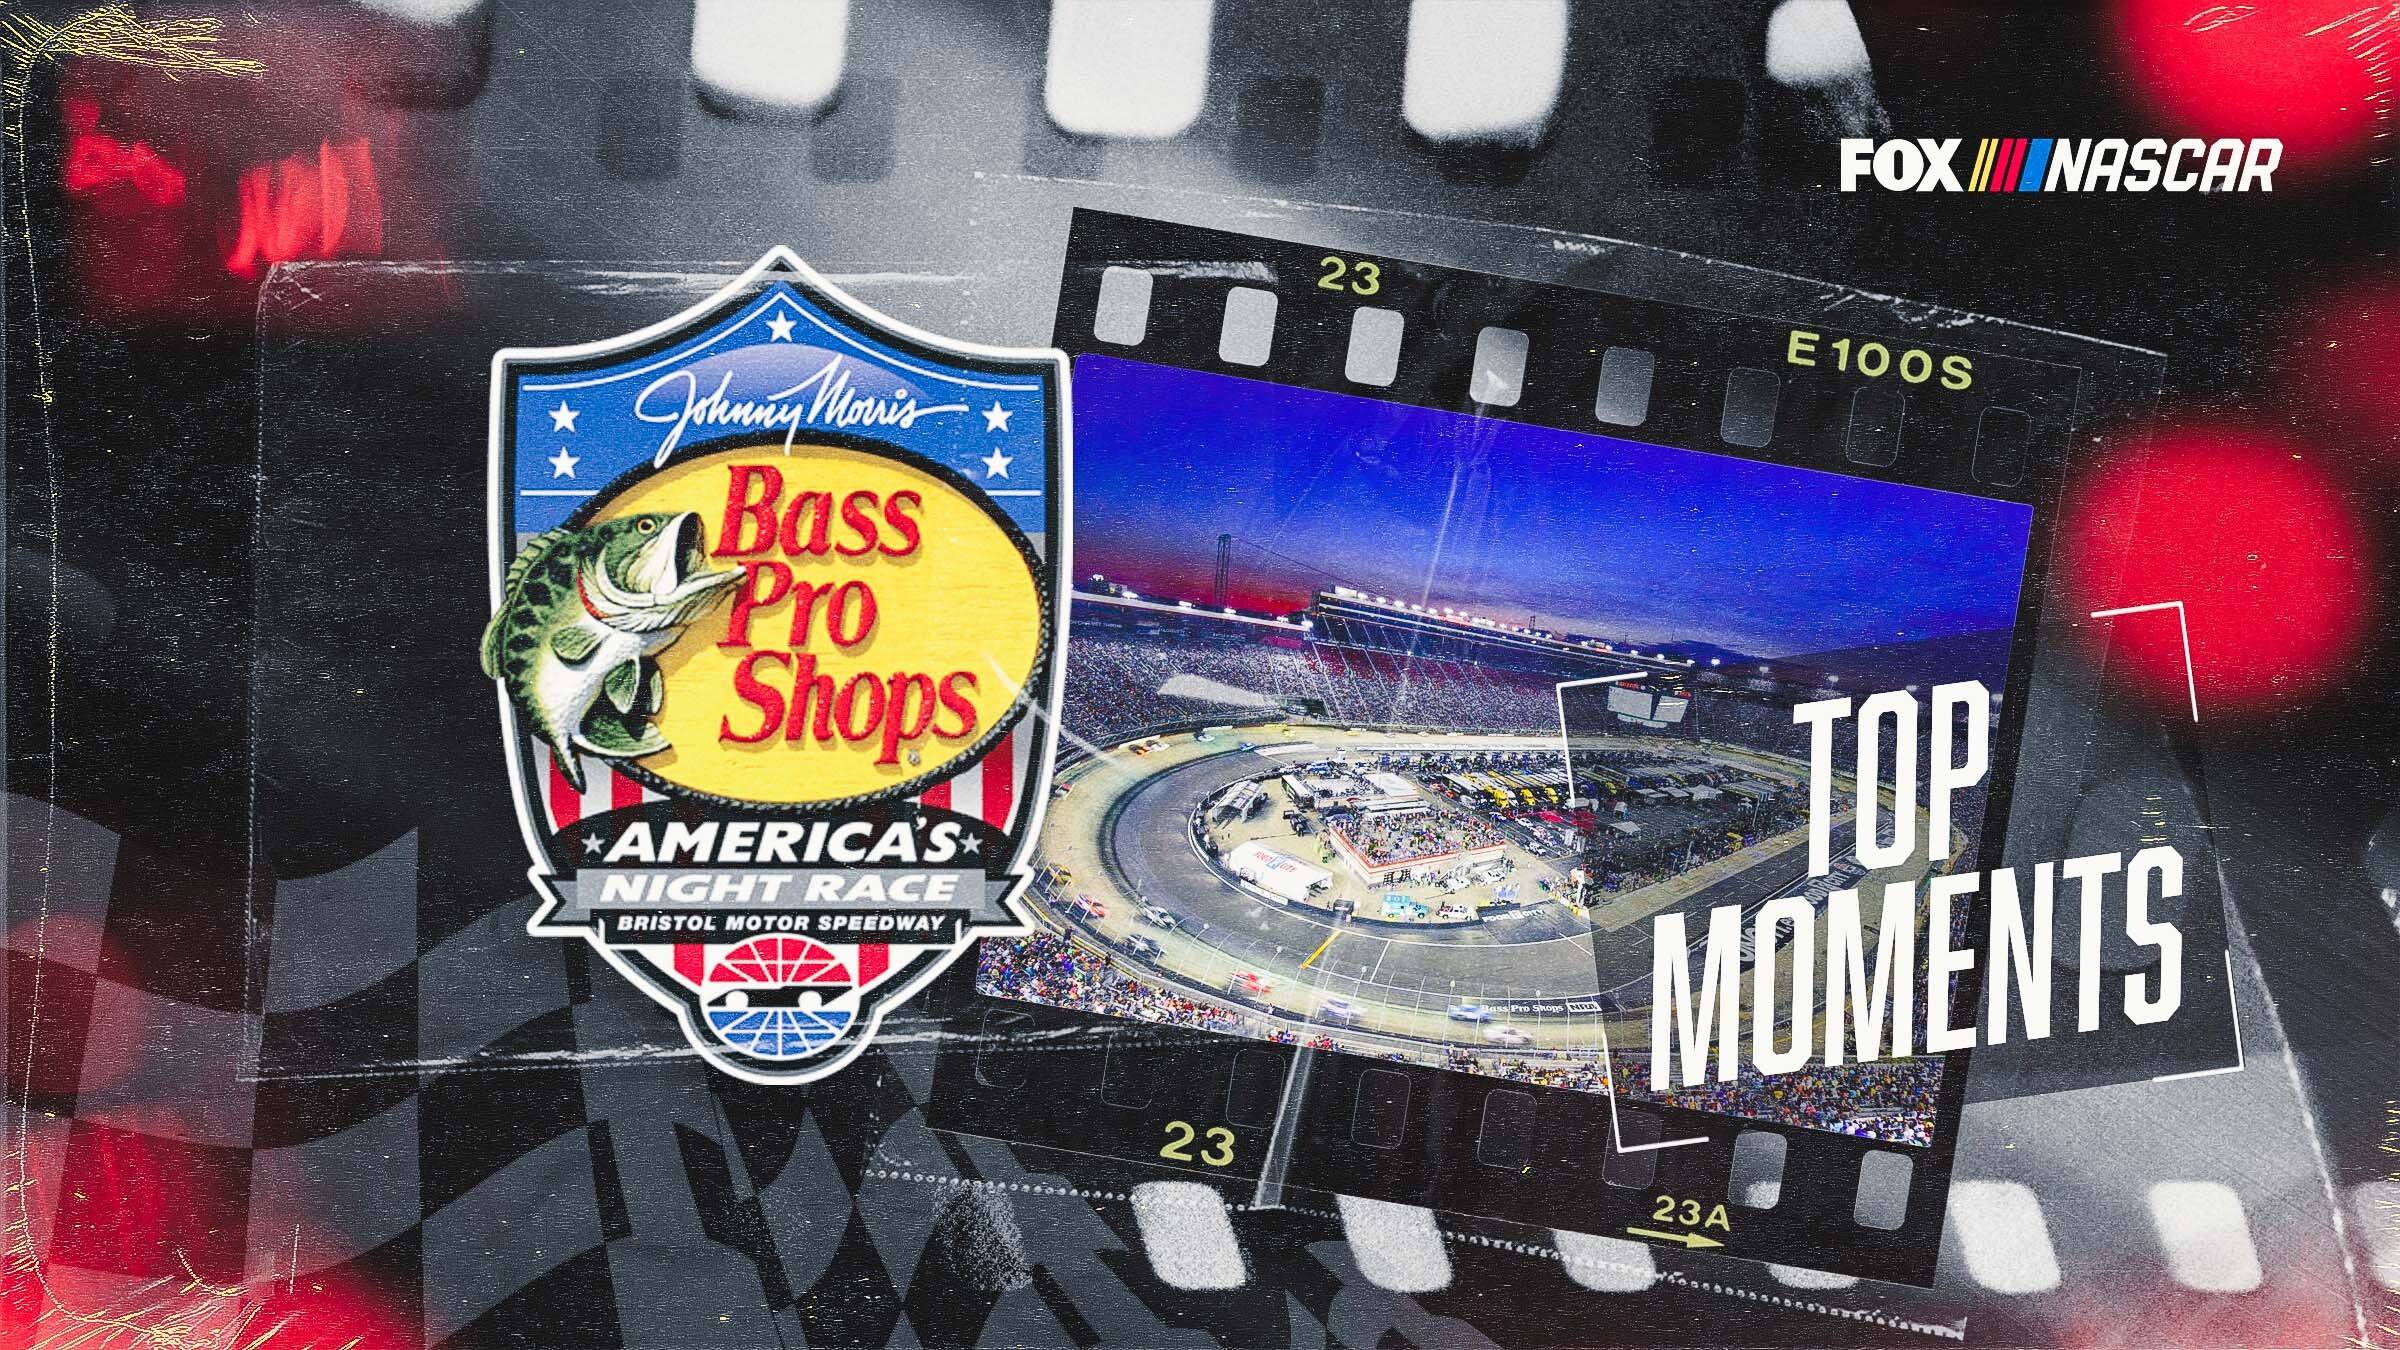 Bass Pro Shops Night Race live updates: Top moments from Bristol